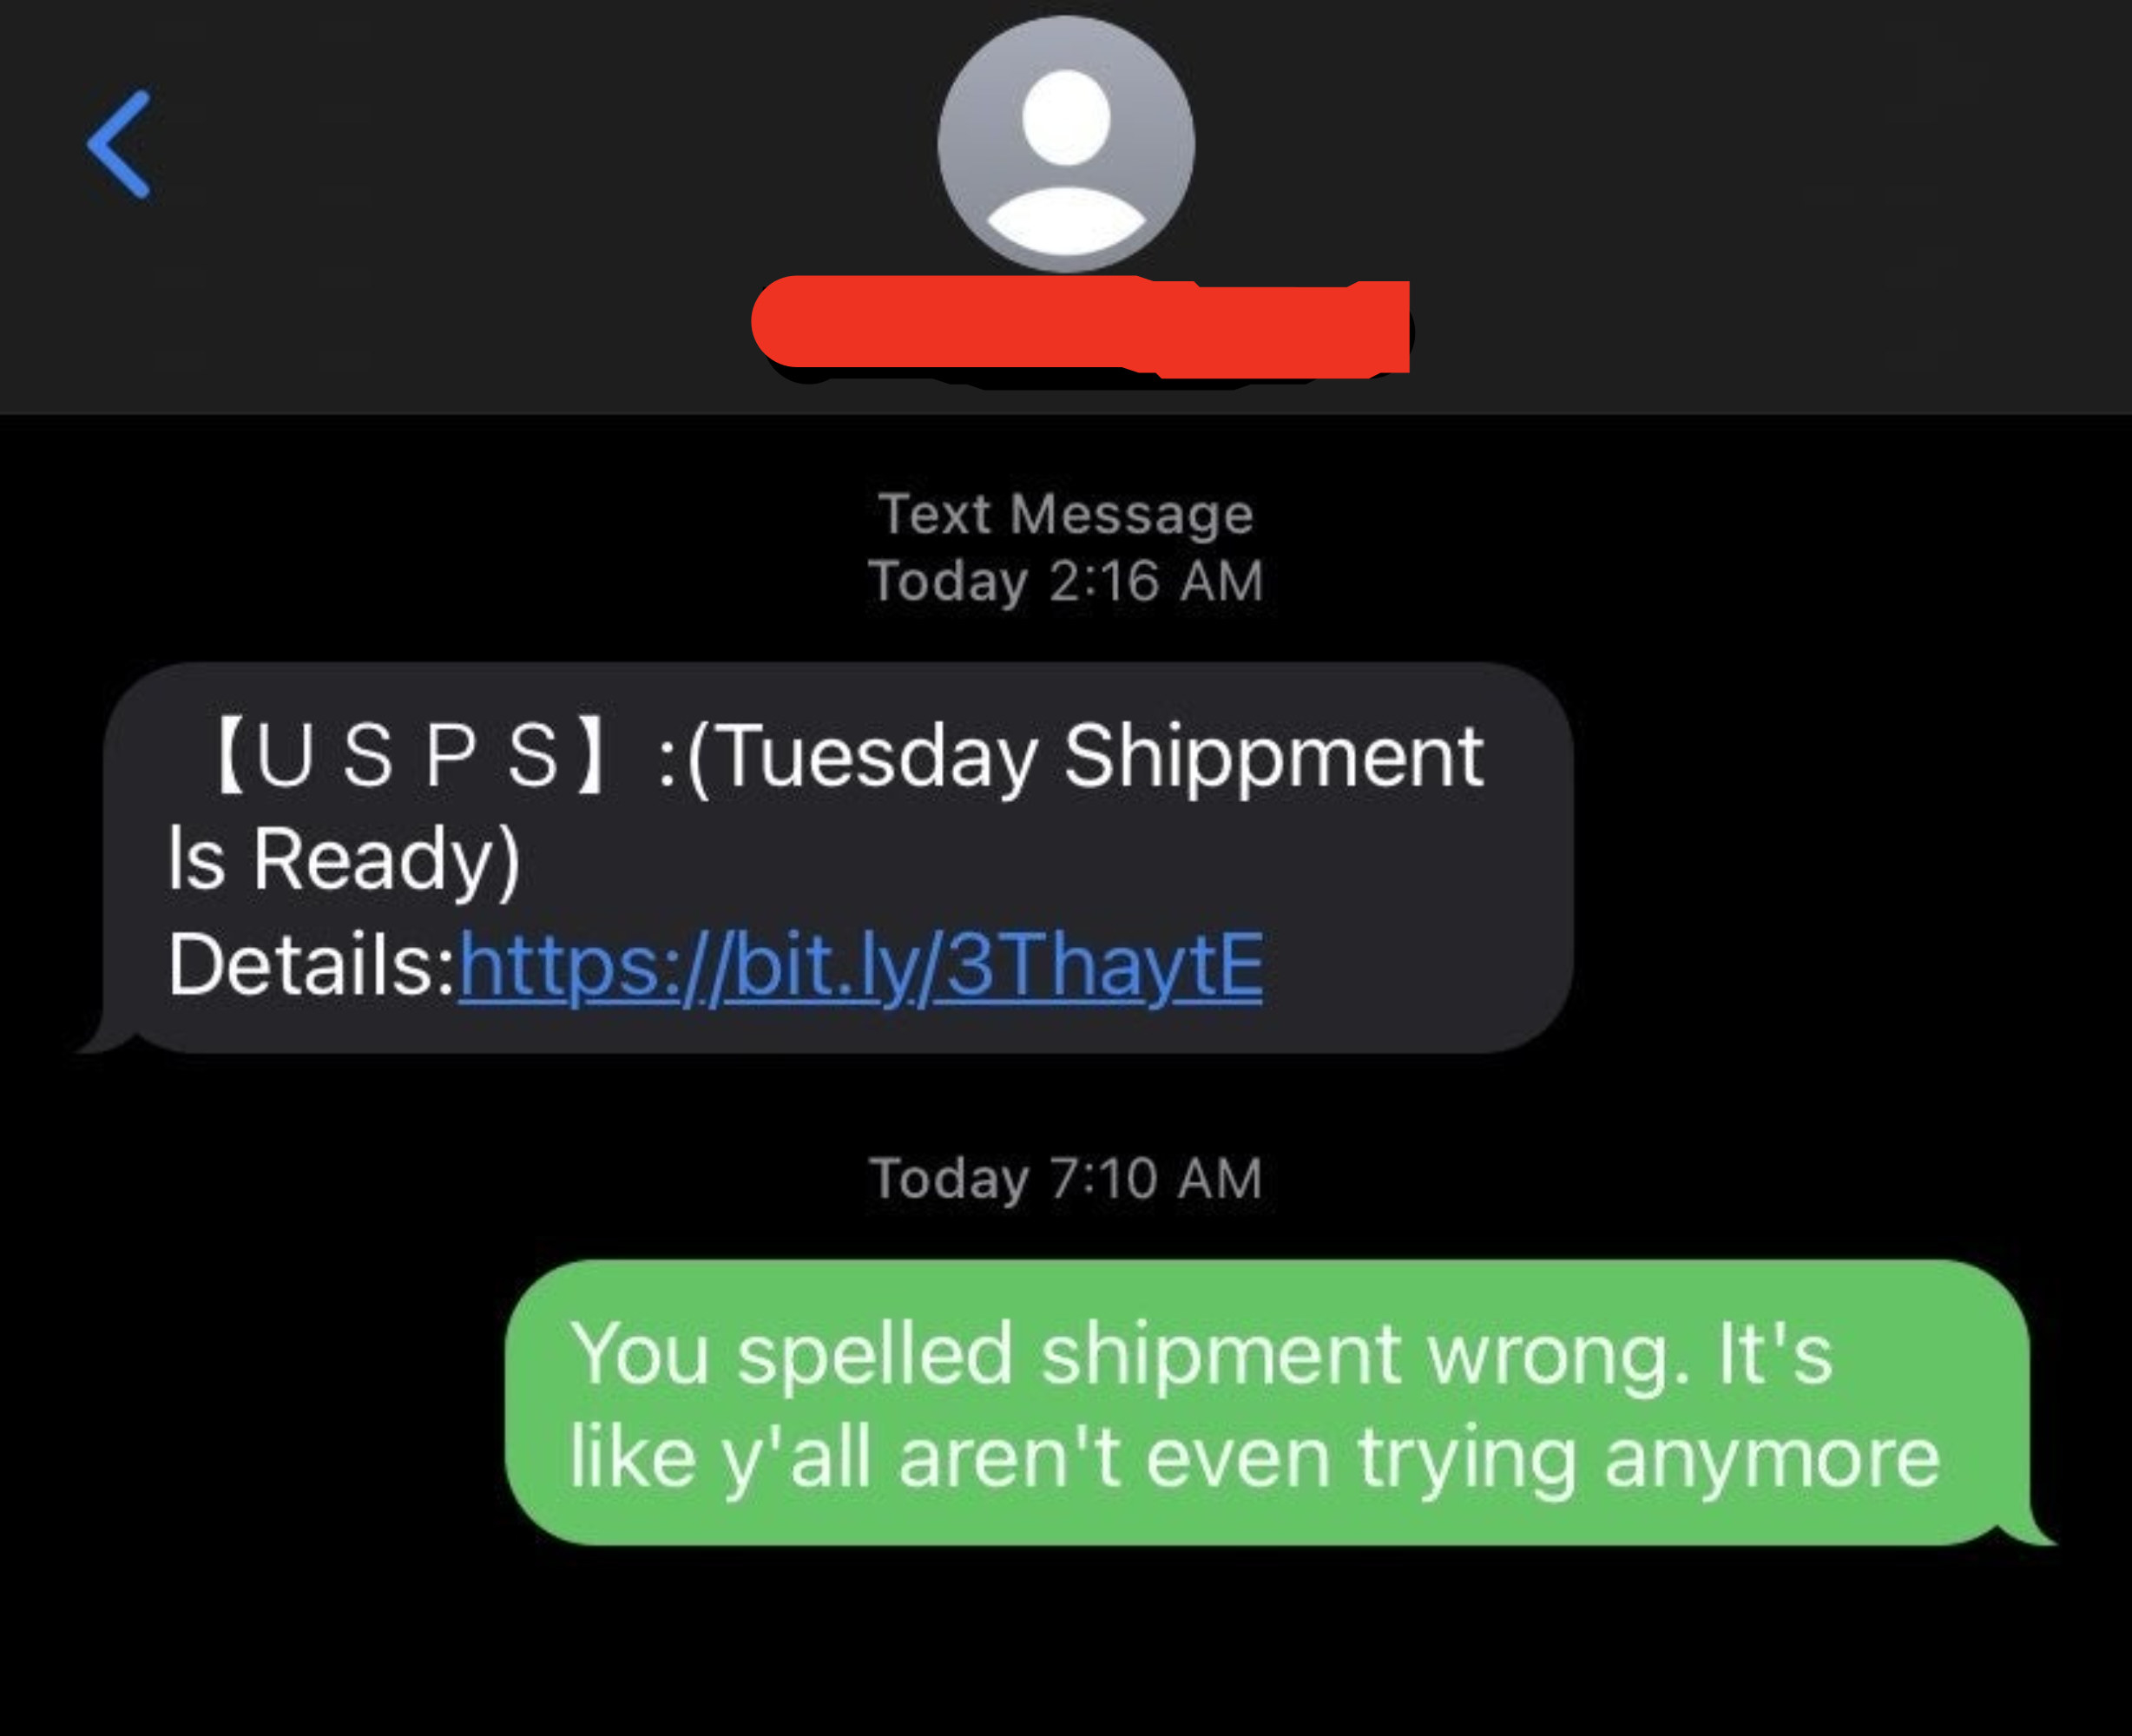 scammer spells shipment wrong and gets called out on it